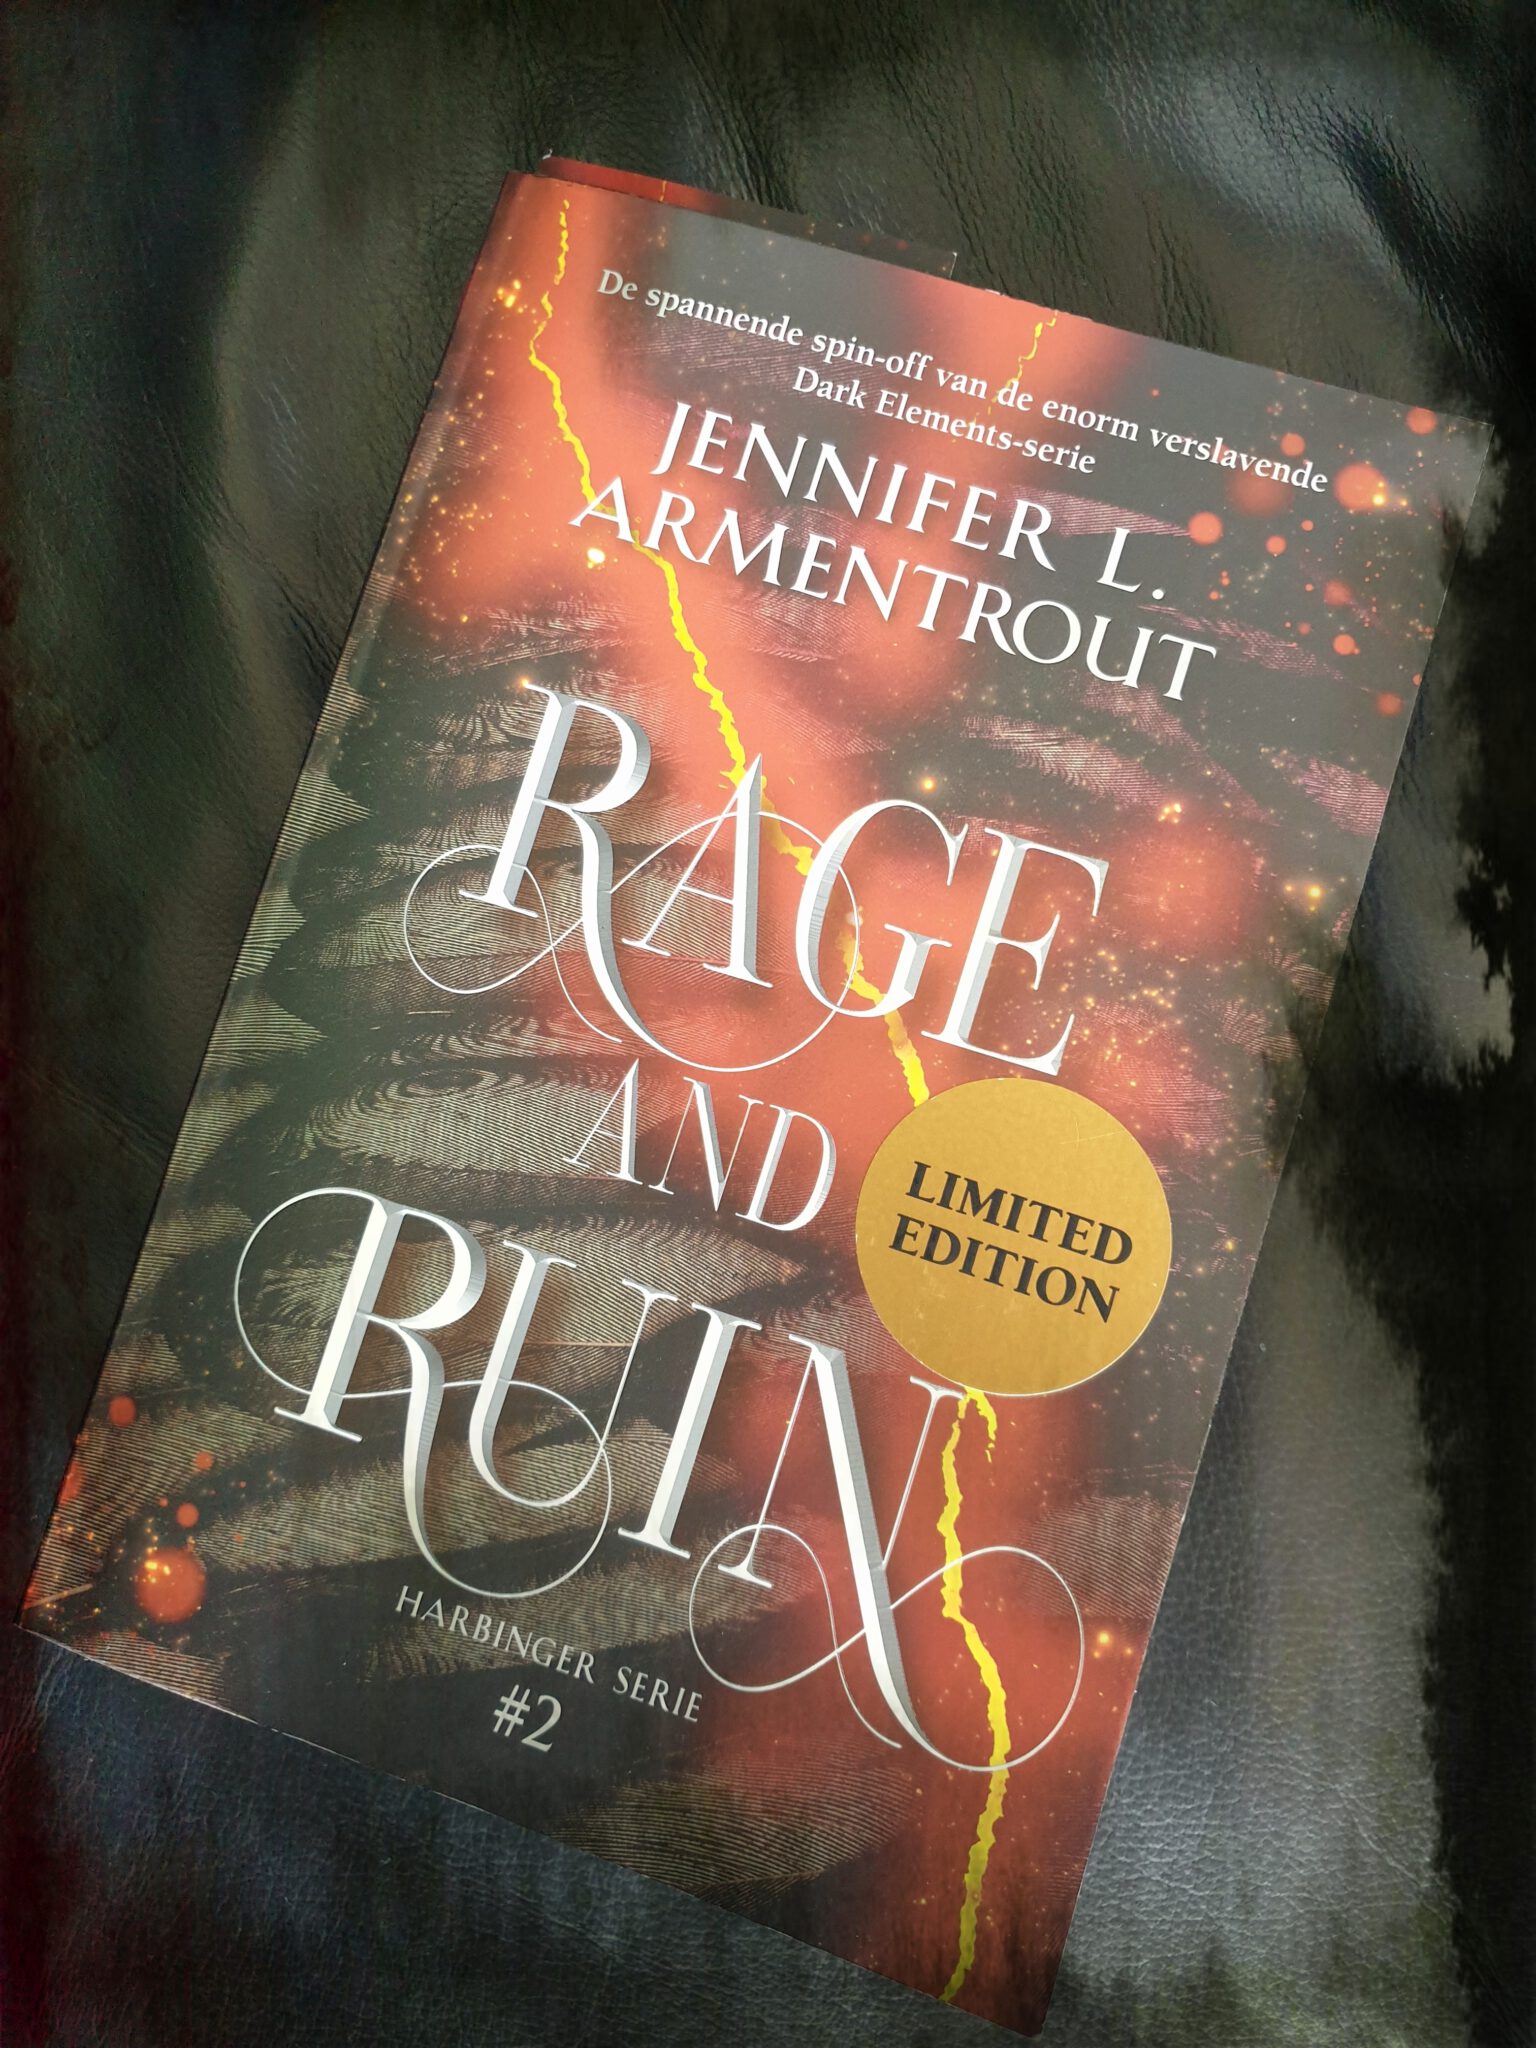 Rage and Ruin by Jennifer L. Armentrout